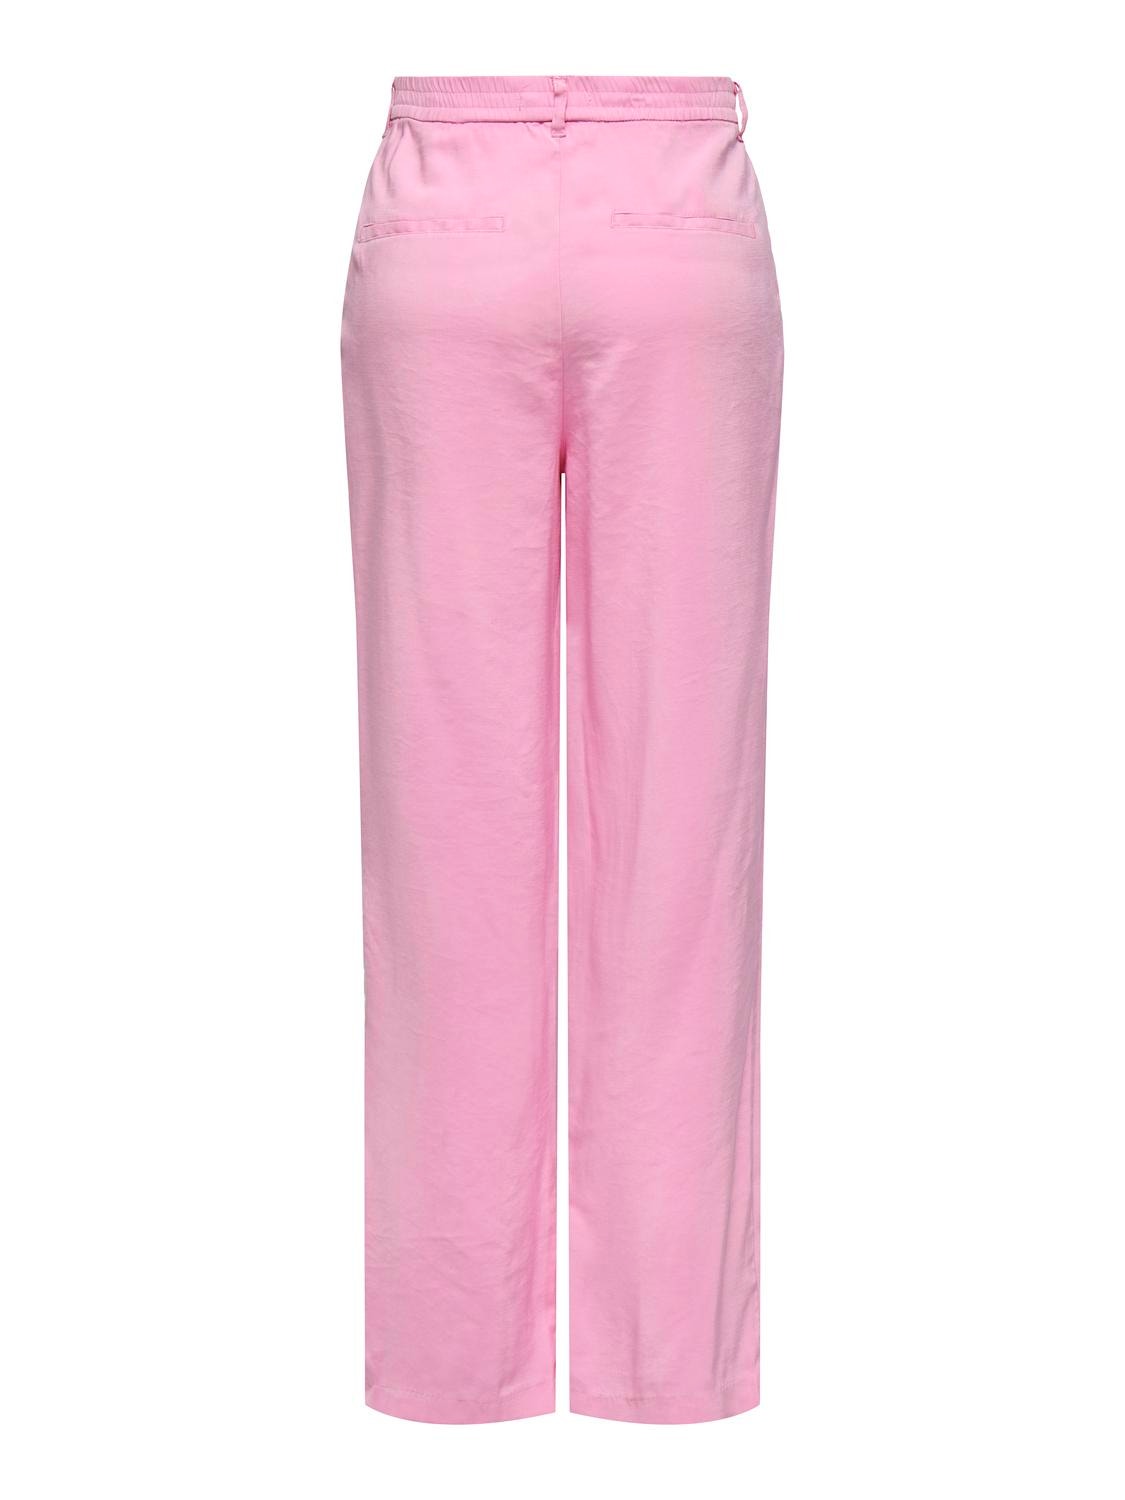 ONLY Straight Fit High waist Trousers -Begonia Pink - 15278699